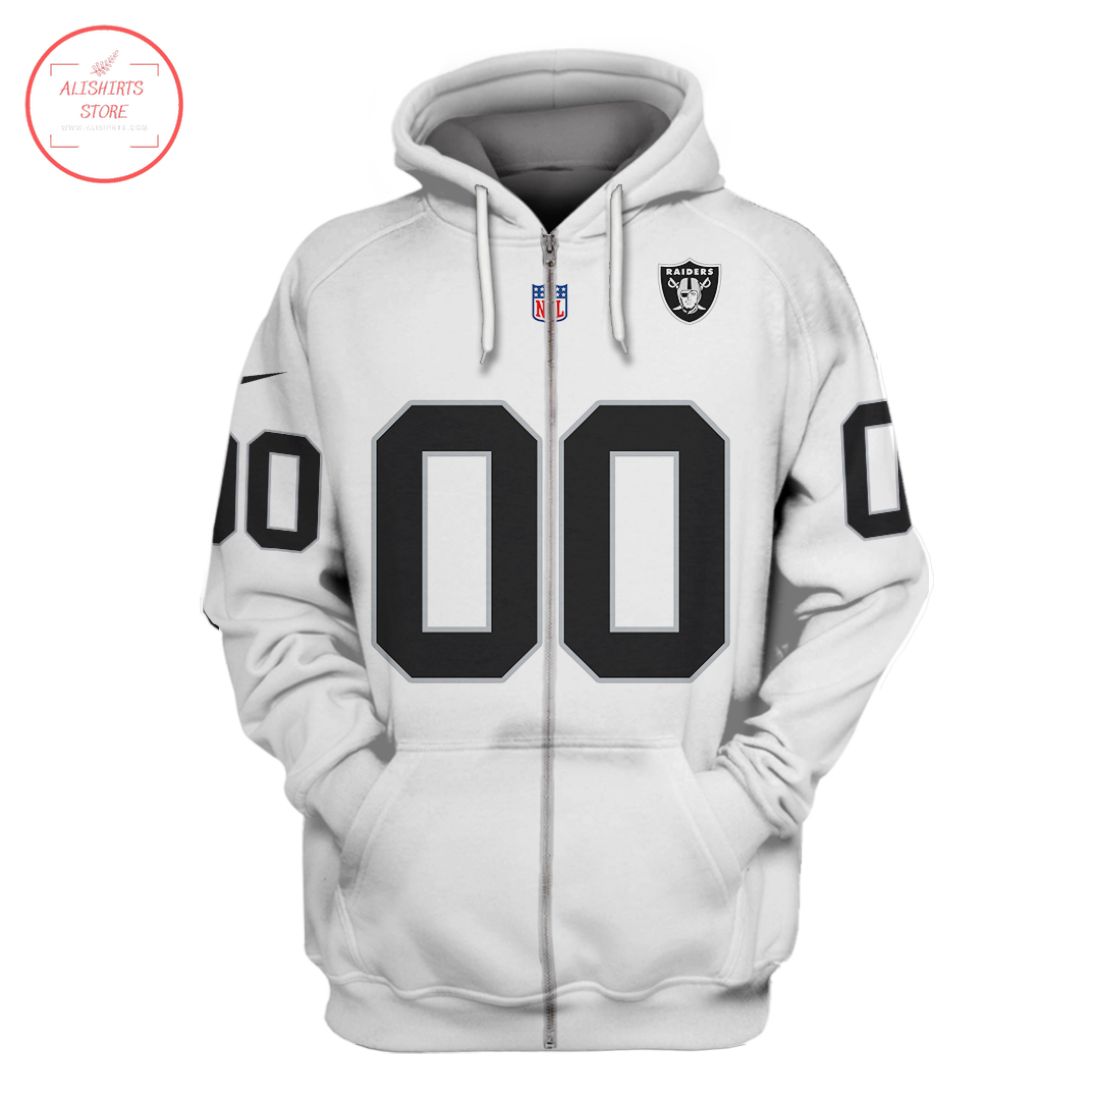 NFL Oakland Raiders Personalized White Shirt and Hoodie